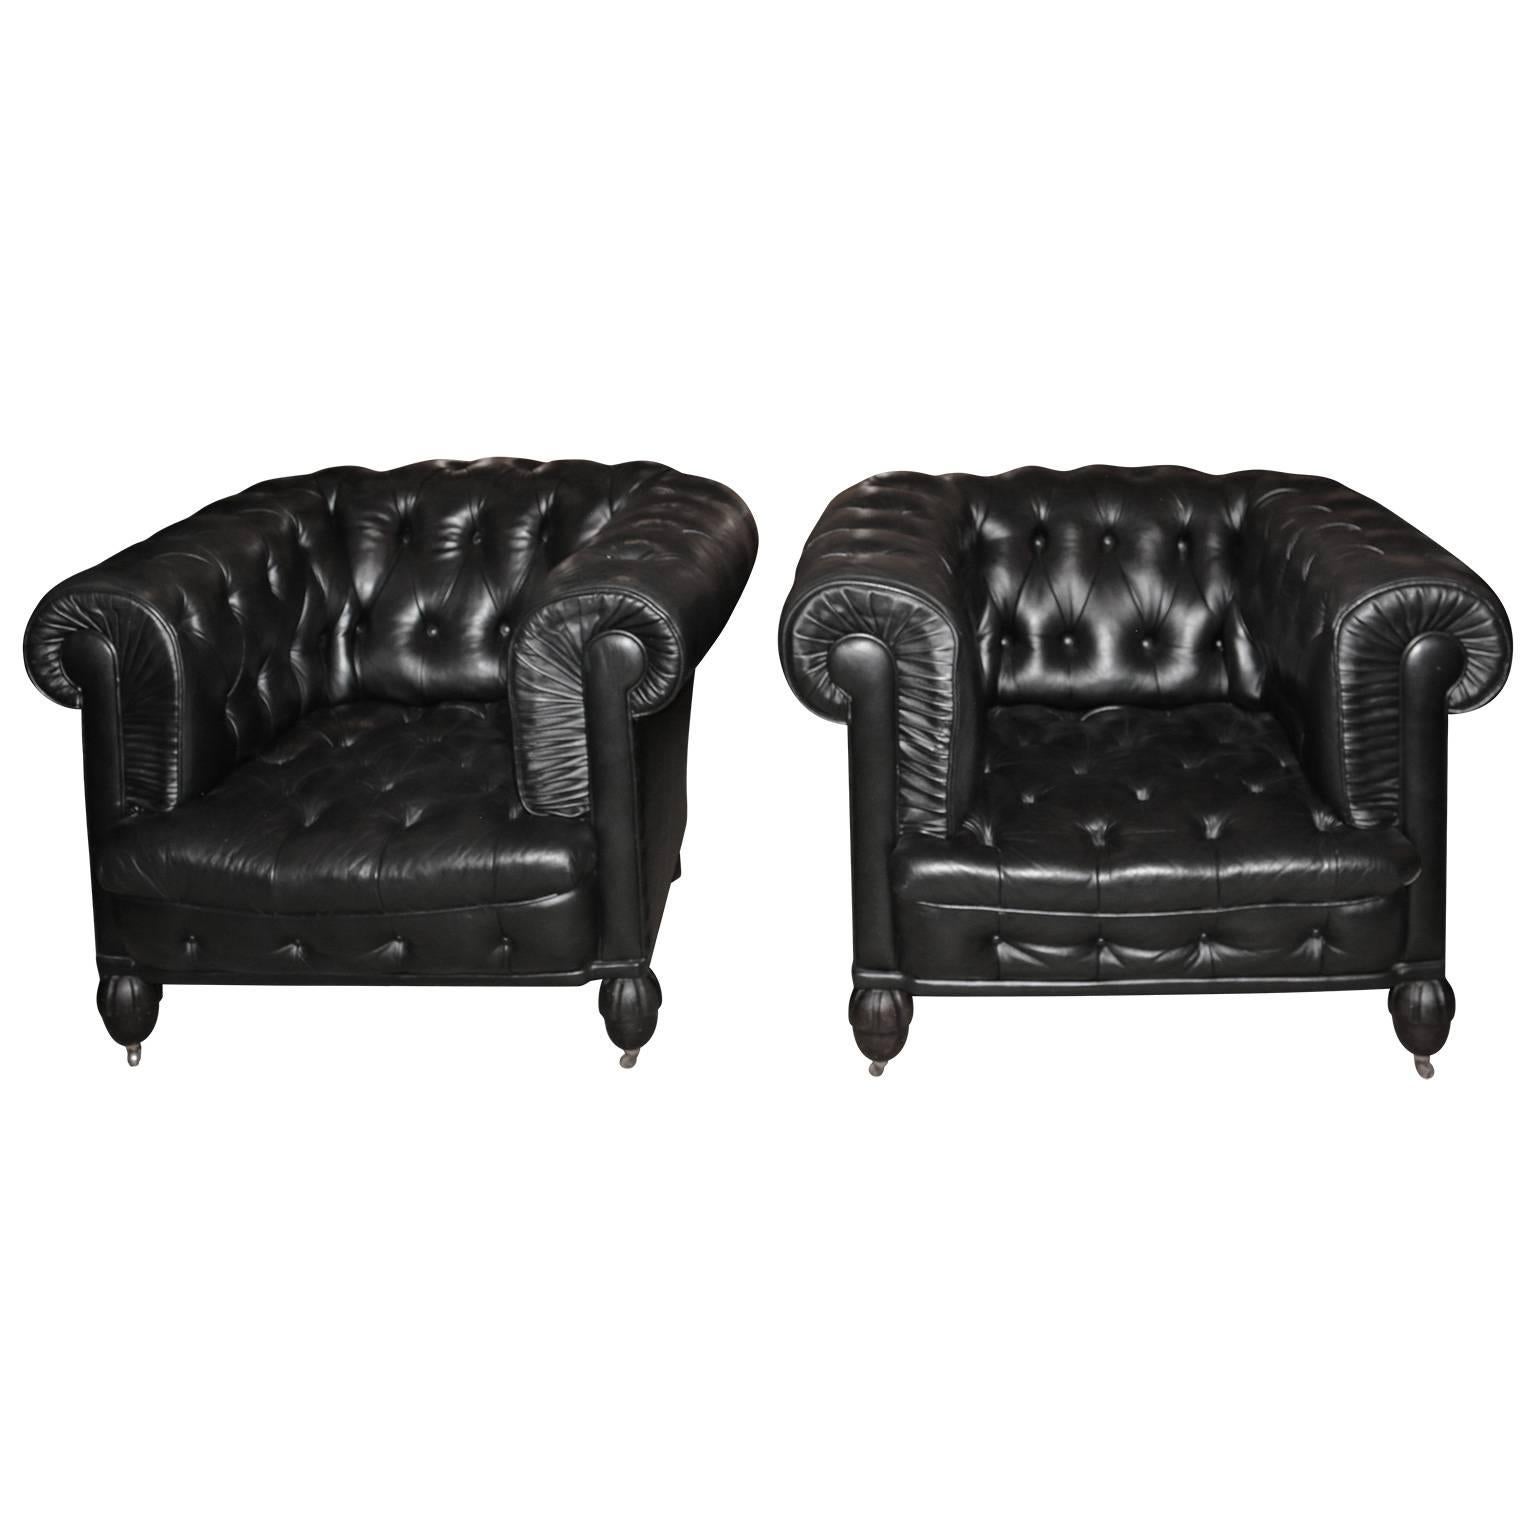 Pair of Chesterfield Leather Tufted Club Seats